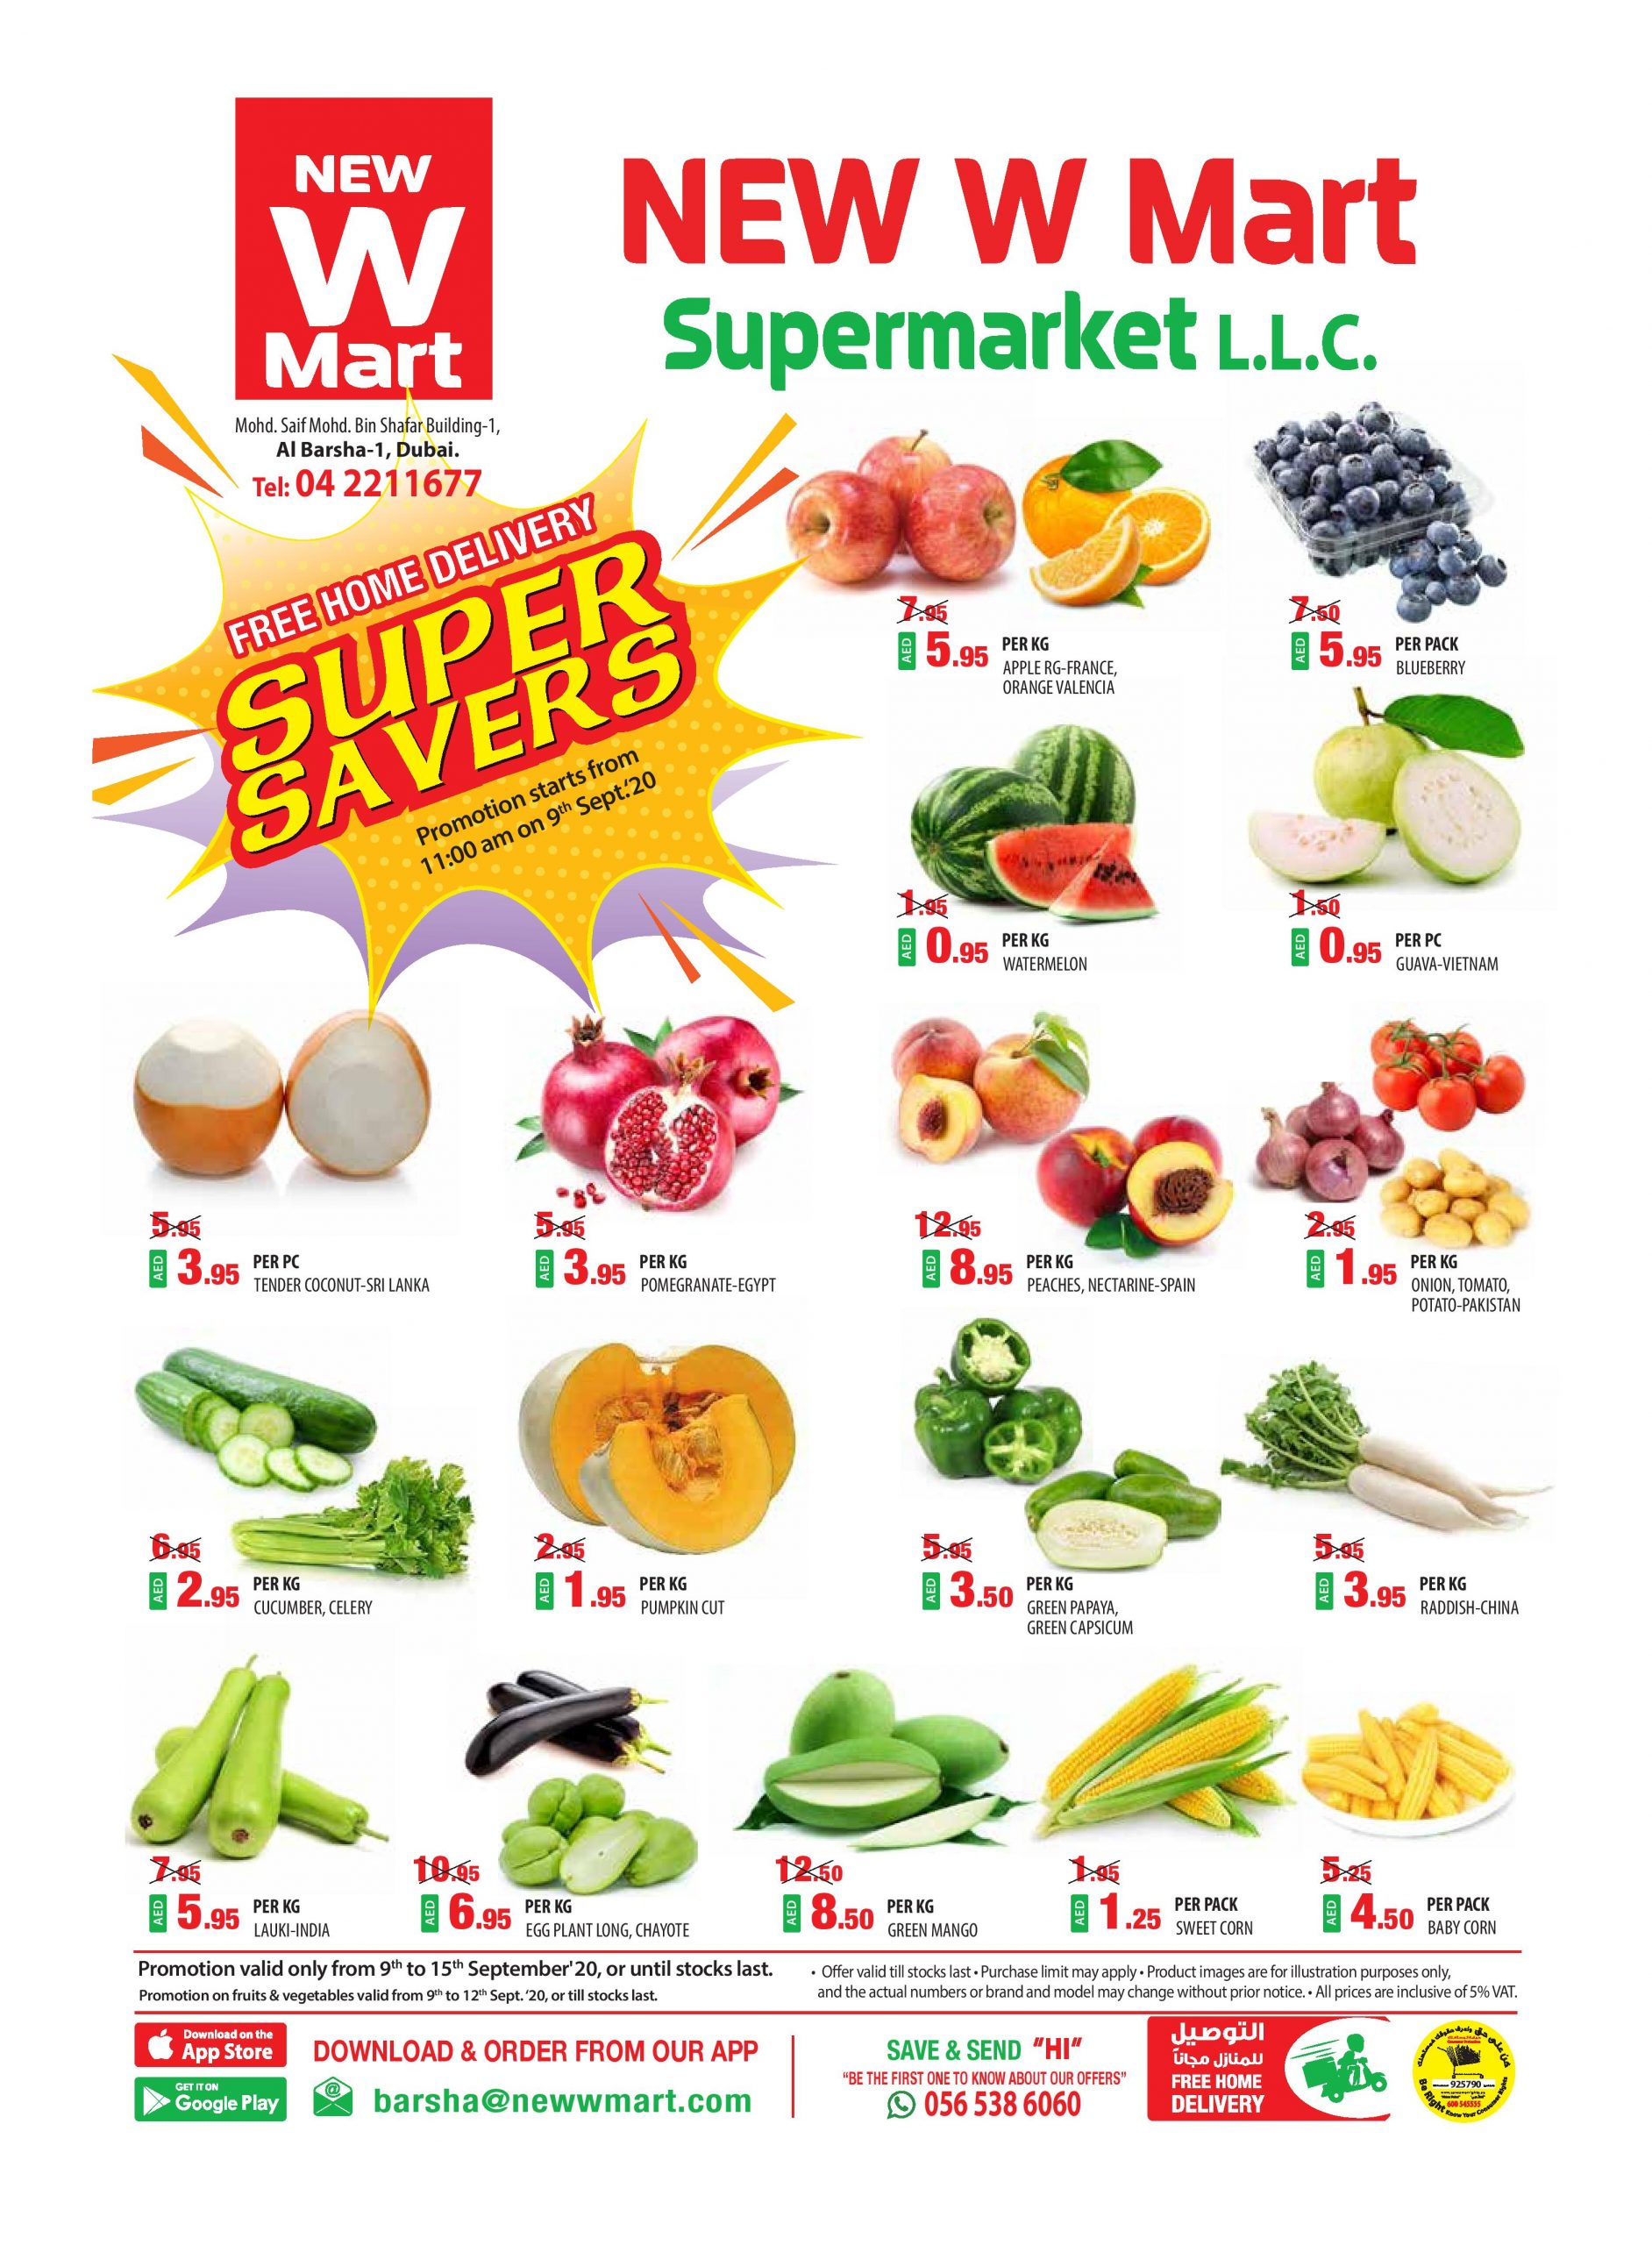 New W Mart September 15 promo Page 1 scaled